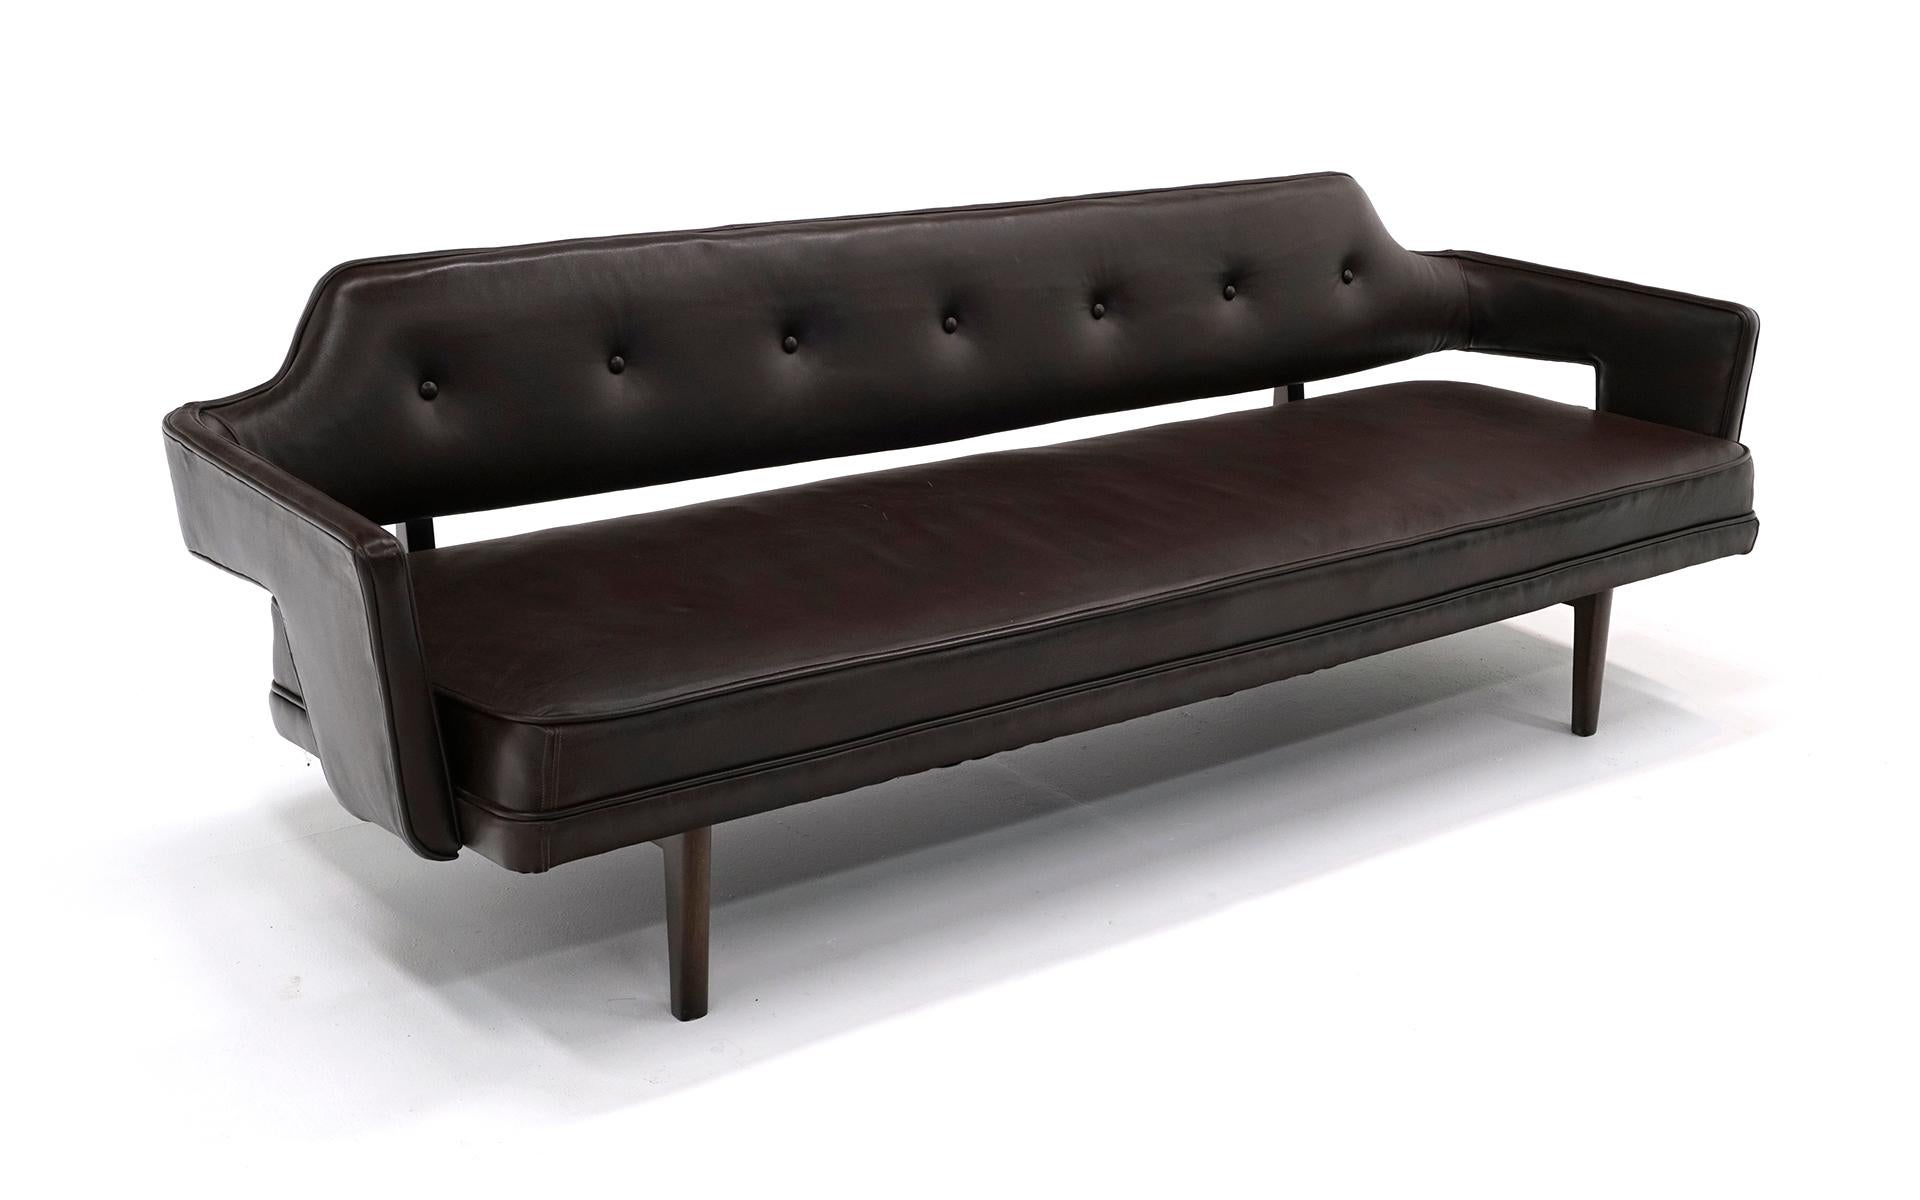 Dark brown leather sofa designed by Edward Wormley for Dunbar. This model is one of the most desirable of all of Wormley's designs. Very good condition with only a few edge scuffs to the leather. Mahogany frame.